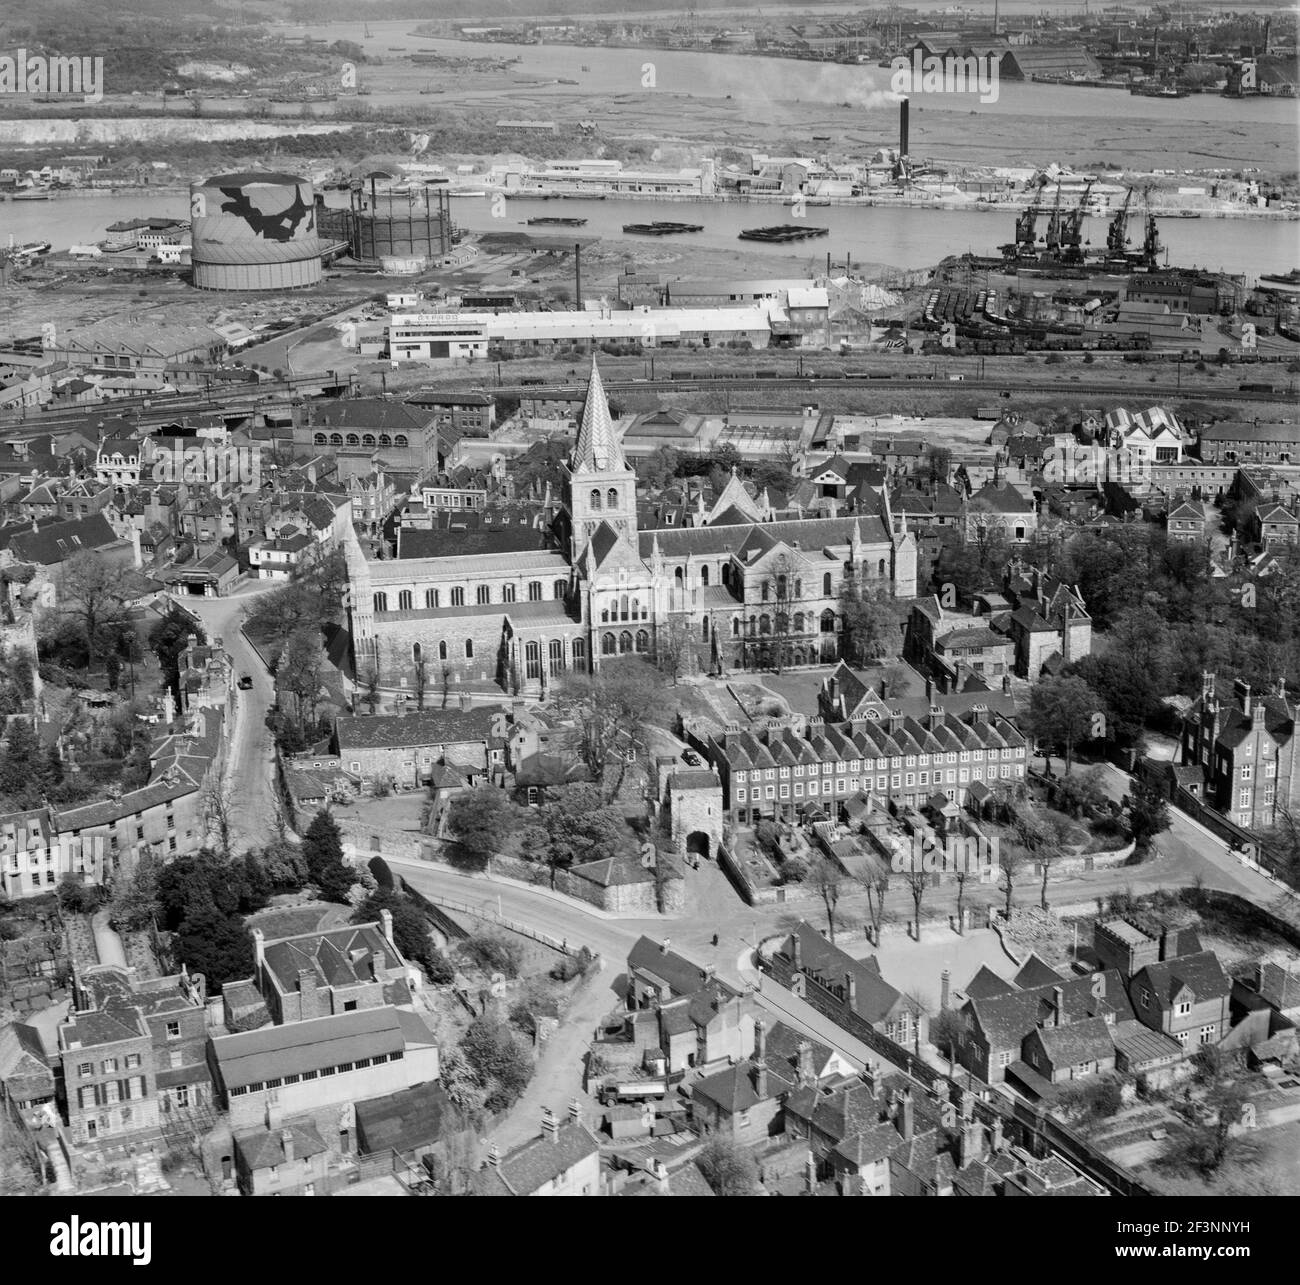 ROCHESTER CATHEDRAL and the River Medway, Kent. Aerial photograph taken in April 1947 showing the gasworks and docks next to Limehouse Reach on the Me Stock Photo